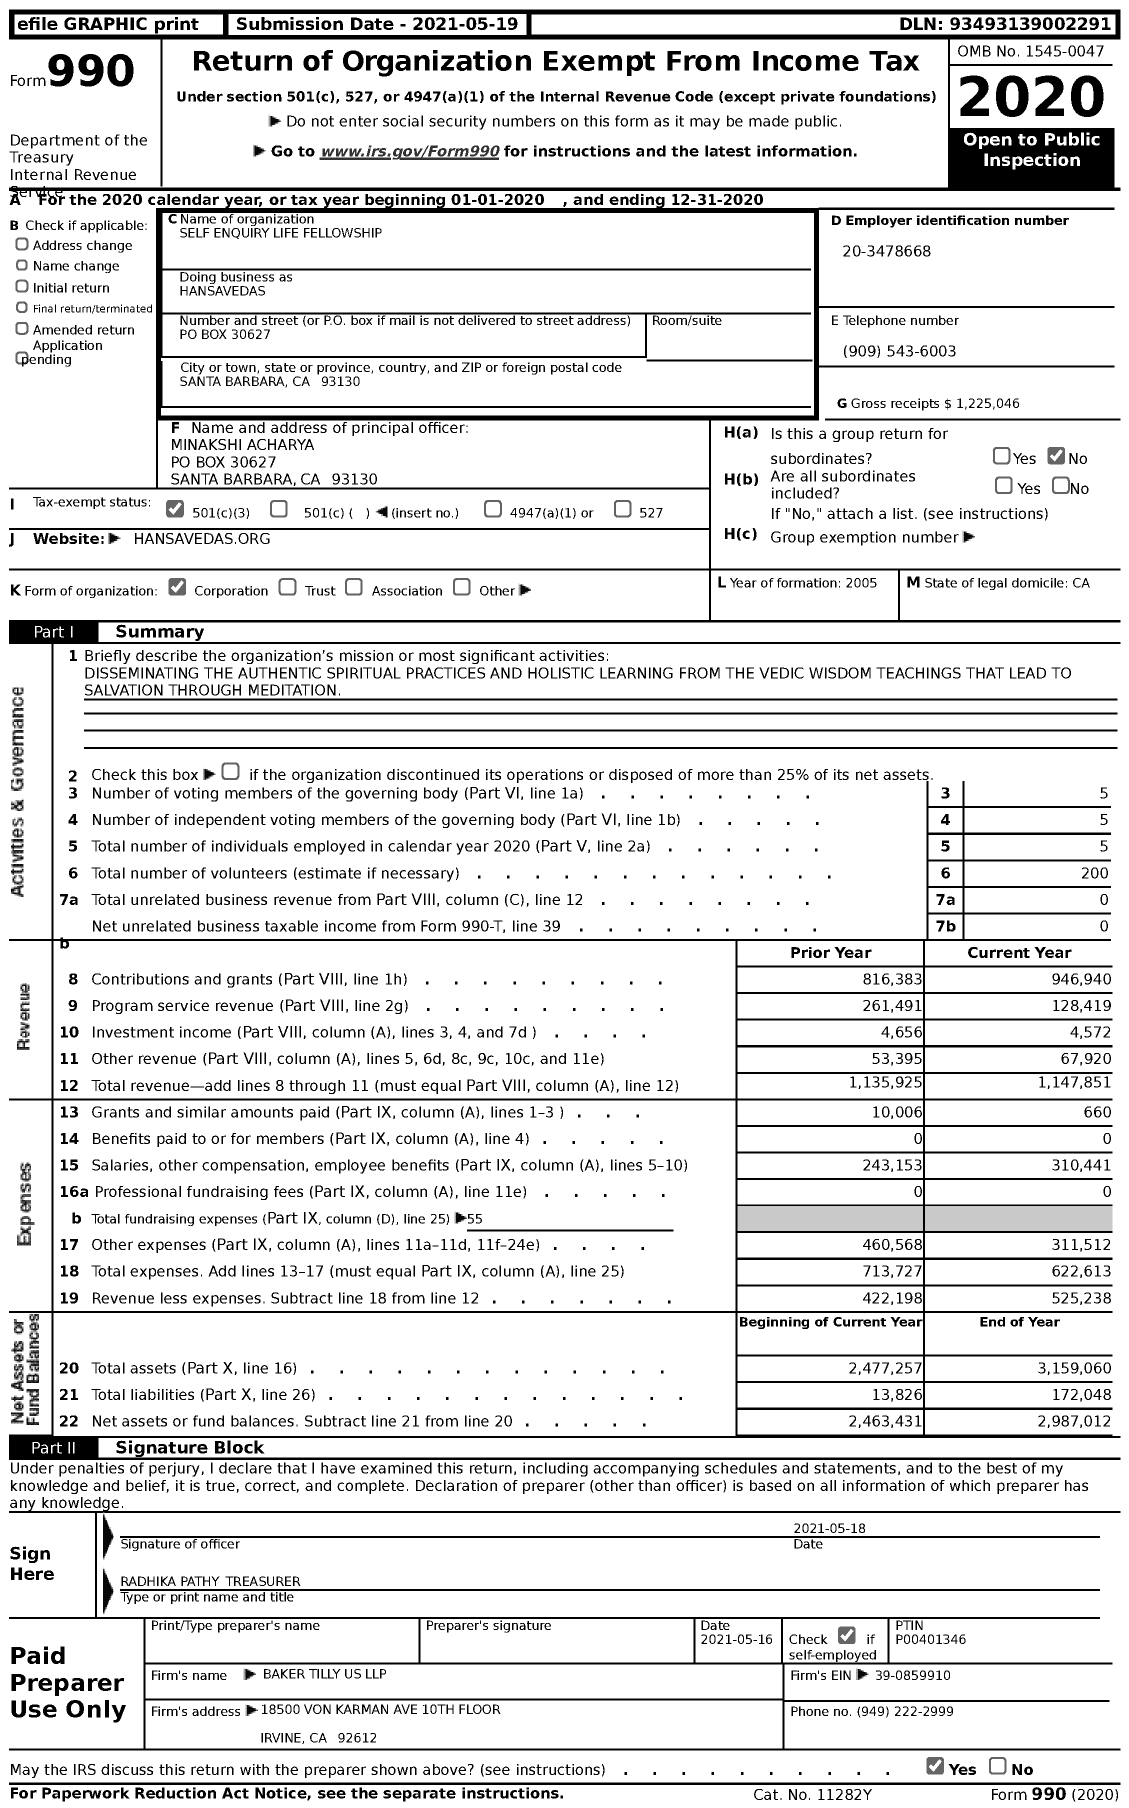 Image of first page of 2020 Form 990 for Hansavedas